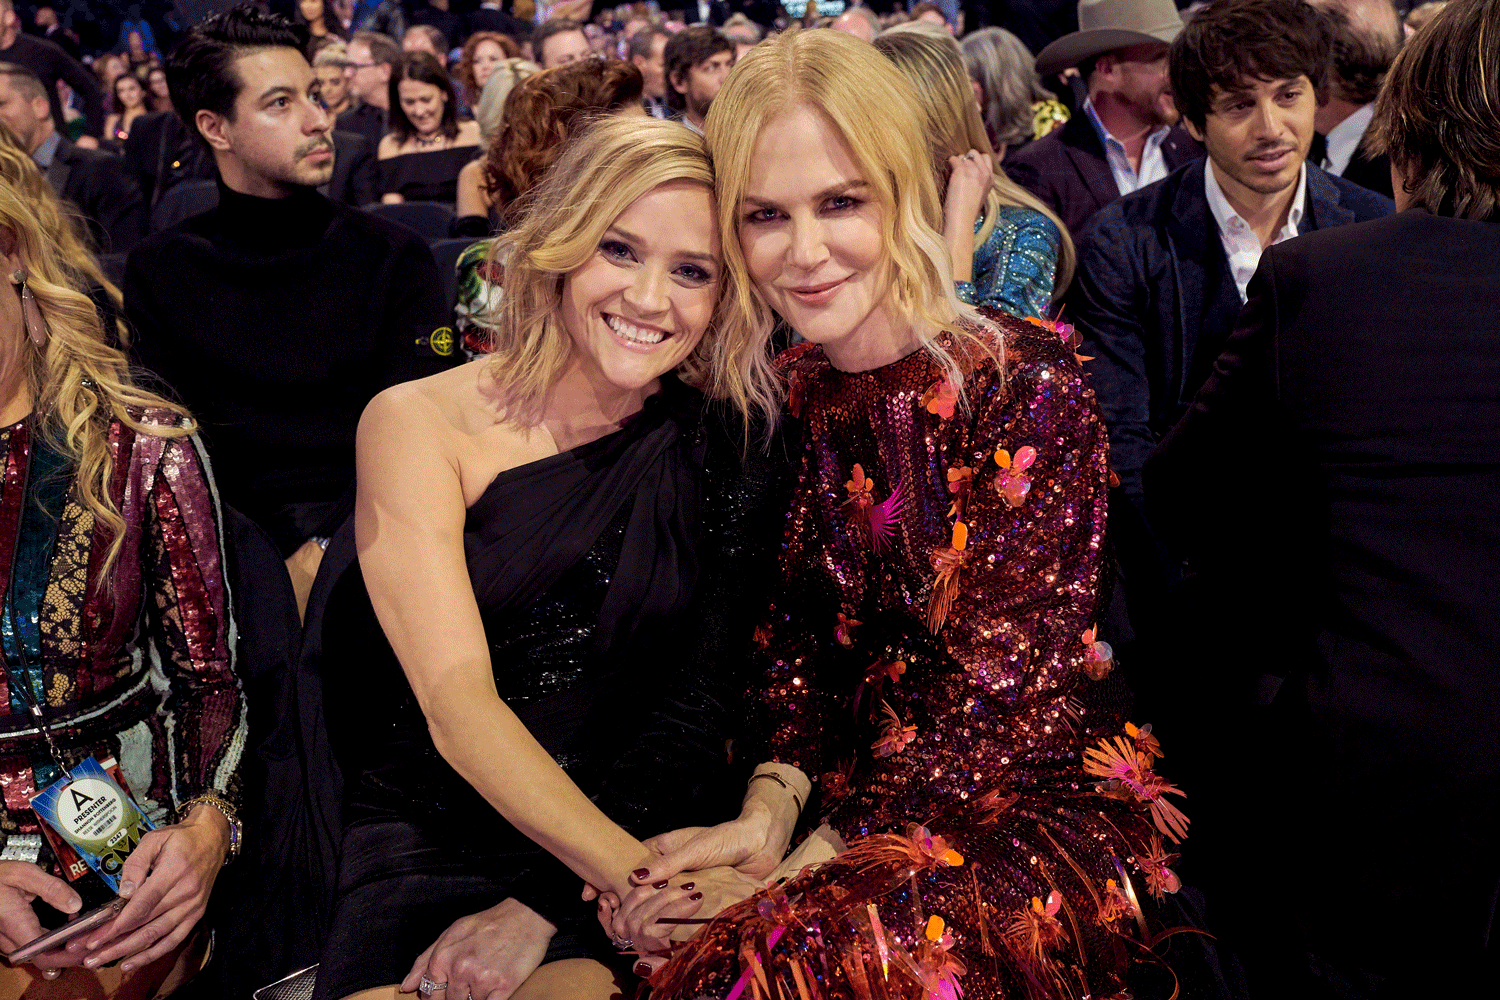 Reese Witherspoon And Nicole Kidman Just Had The ‘Big Little Lies’ Reunion We’ve Been Waiting For